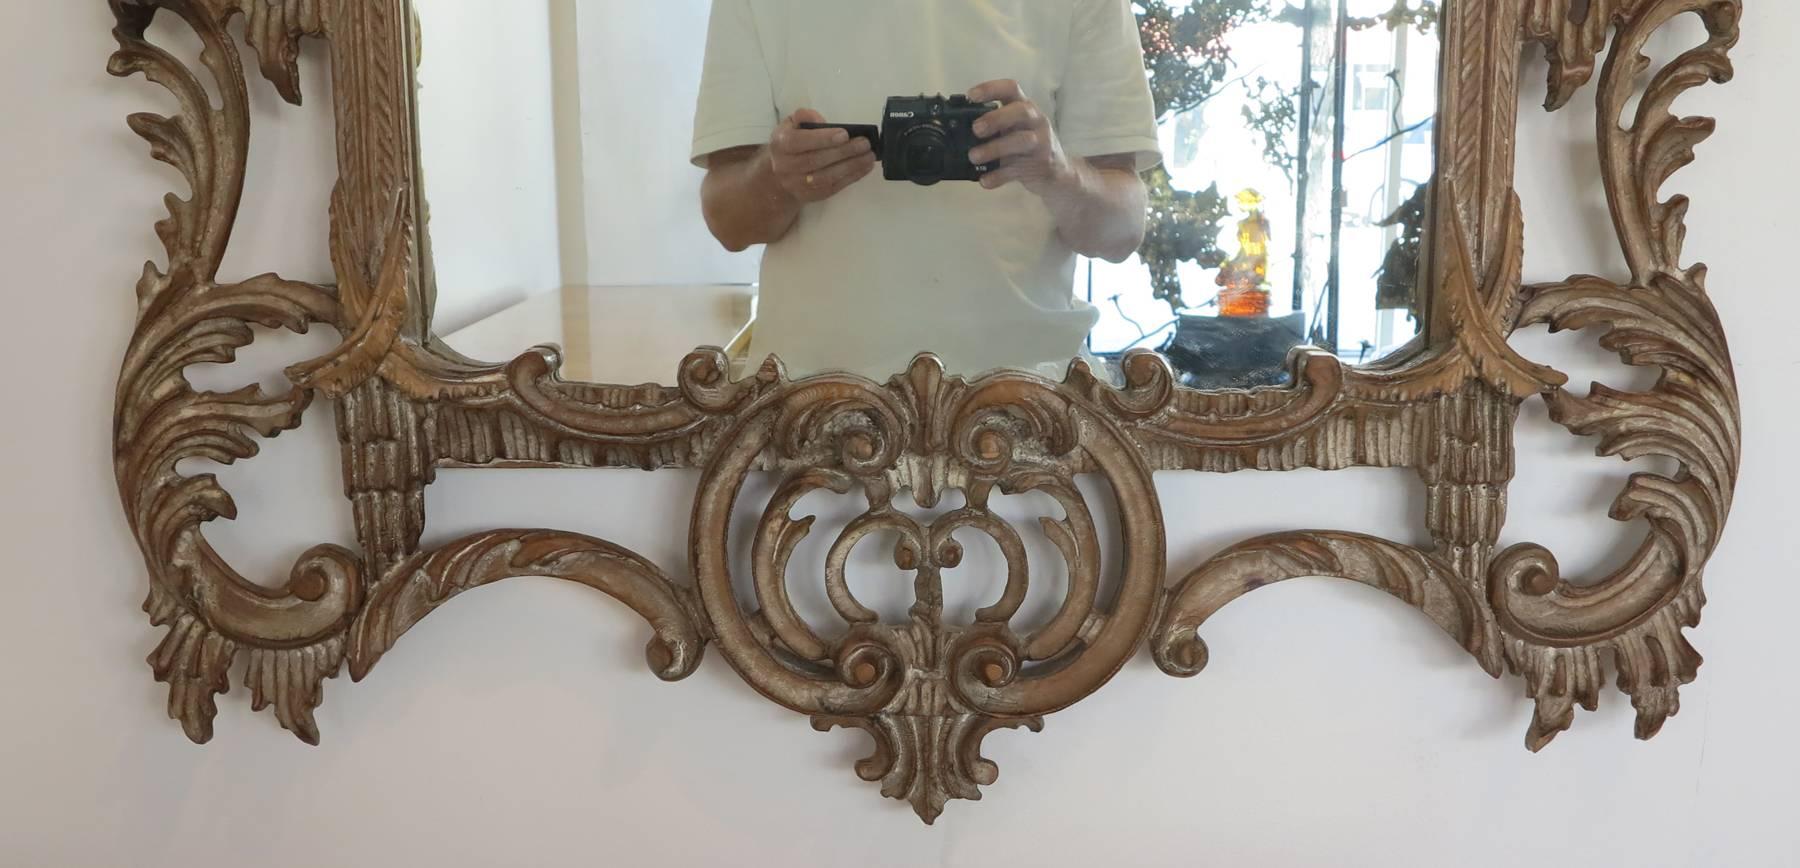 Chinese Chippendale hand-carved wood Mirror. 1950s Italian 